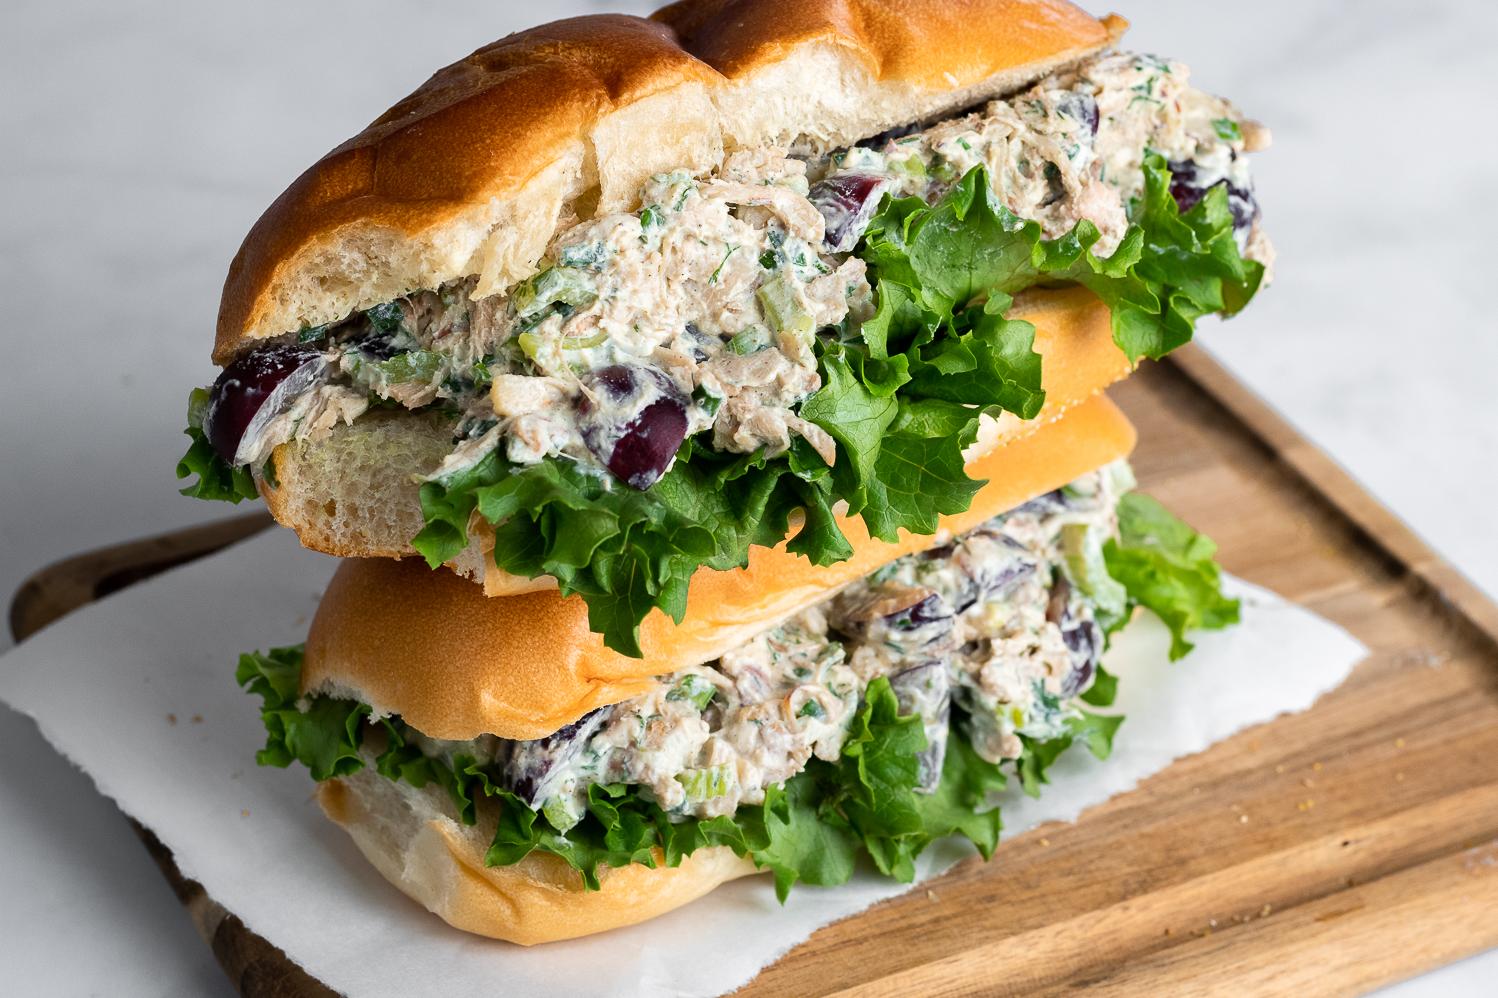  Who says chicken salad has to have chicken? This vegetarian version is just as satisfying.